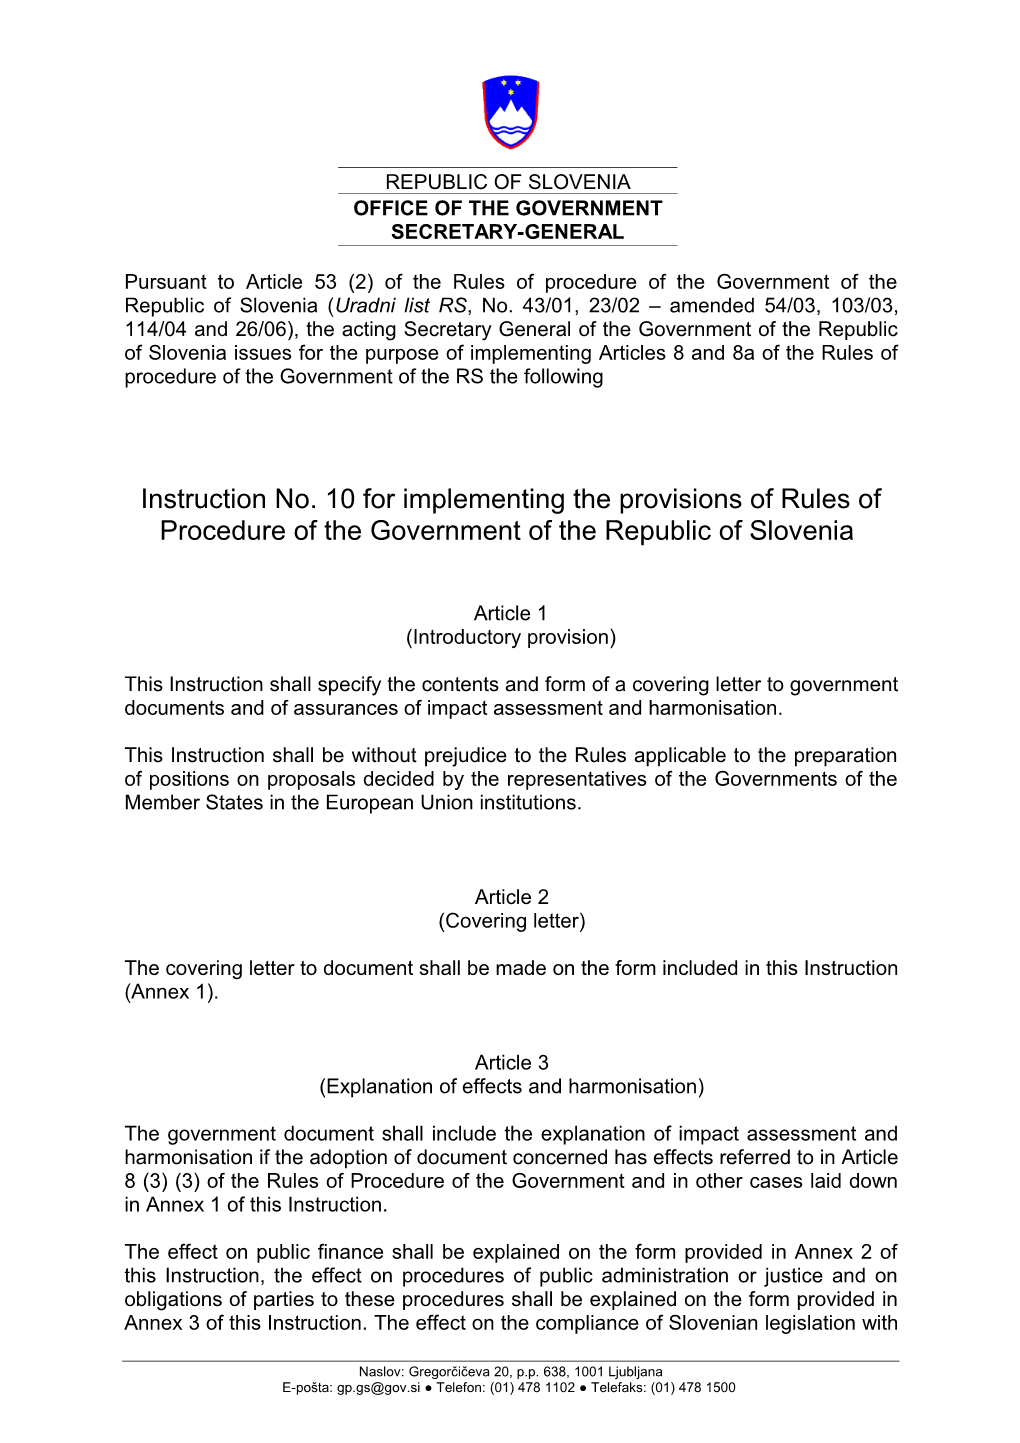 Pursuant to Article 53 (2) of the Rules of Procedure of the Government of the Republic